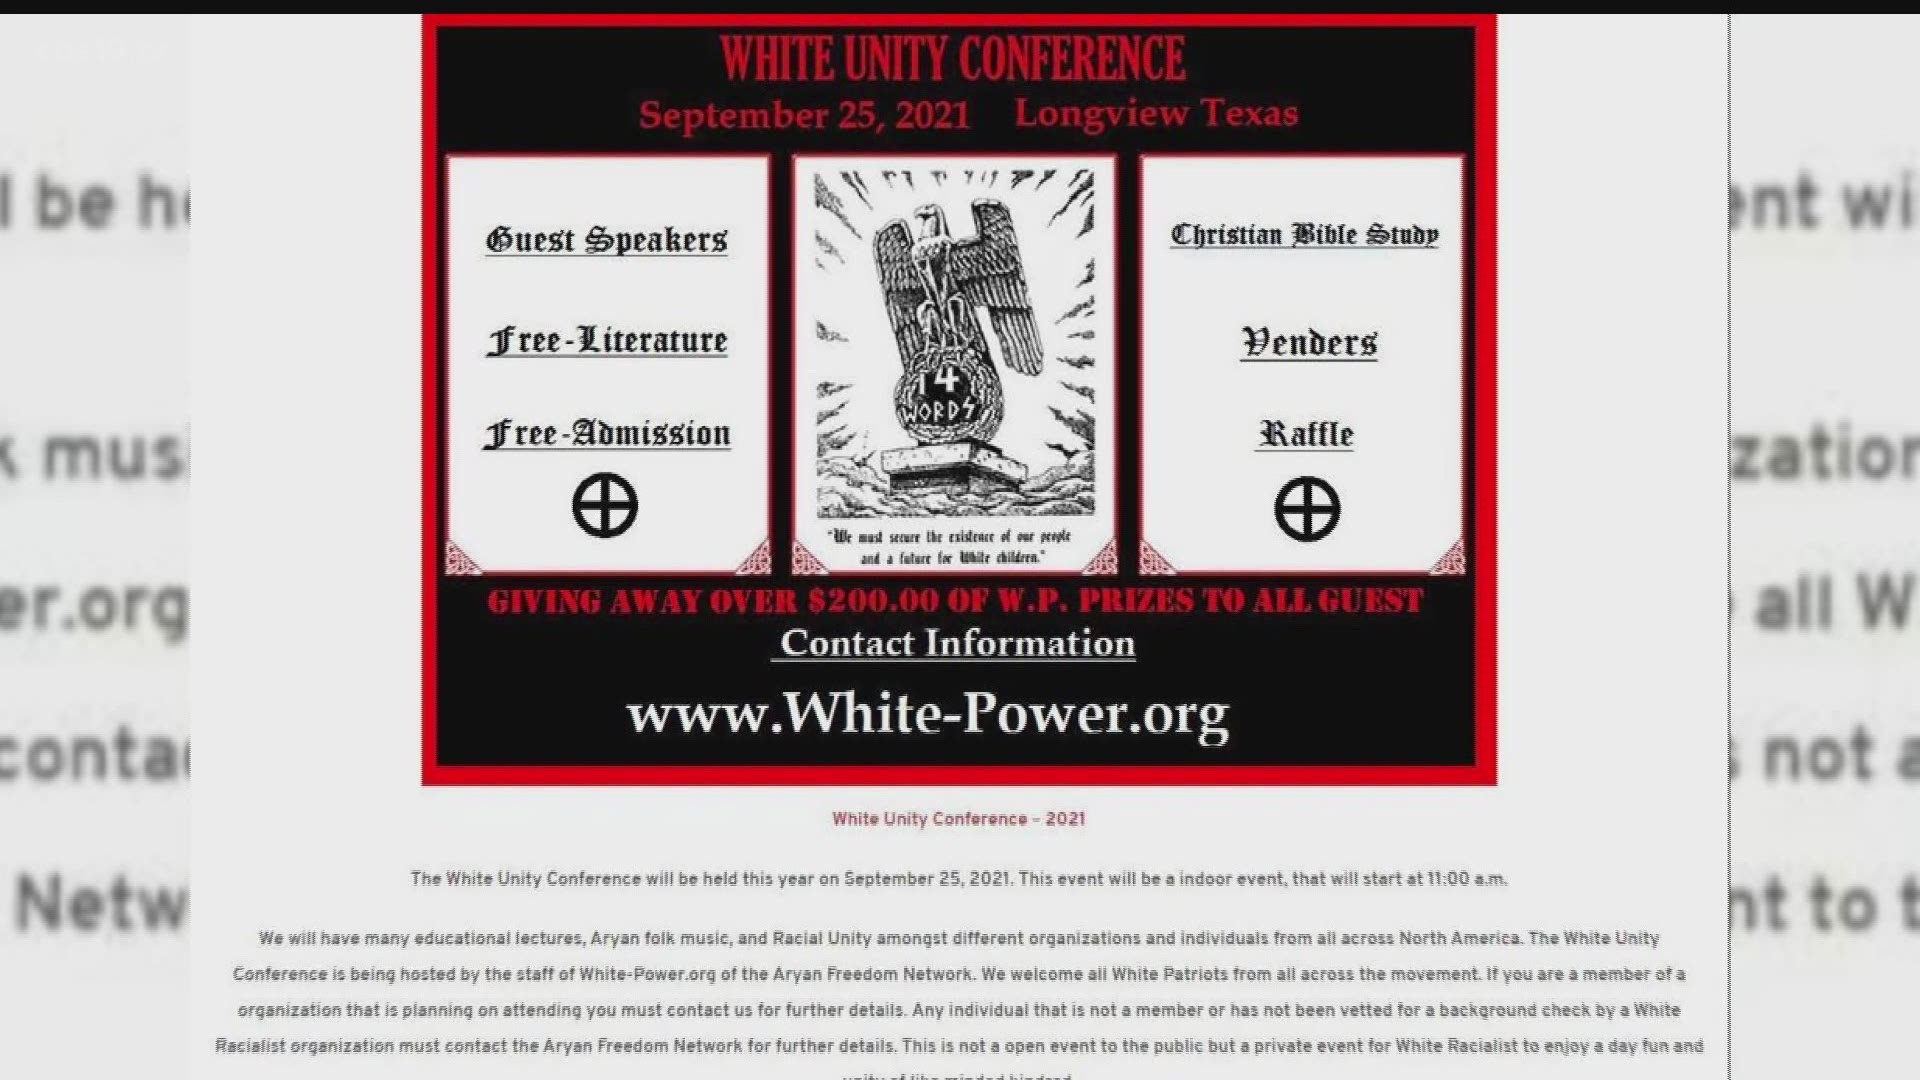 Longview mayor responds to potential 'White Unity Conference' claiming to take place in September. City officials say the event if not verified.